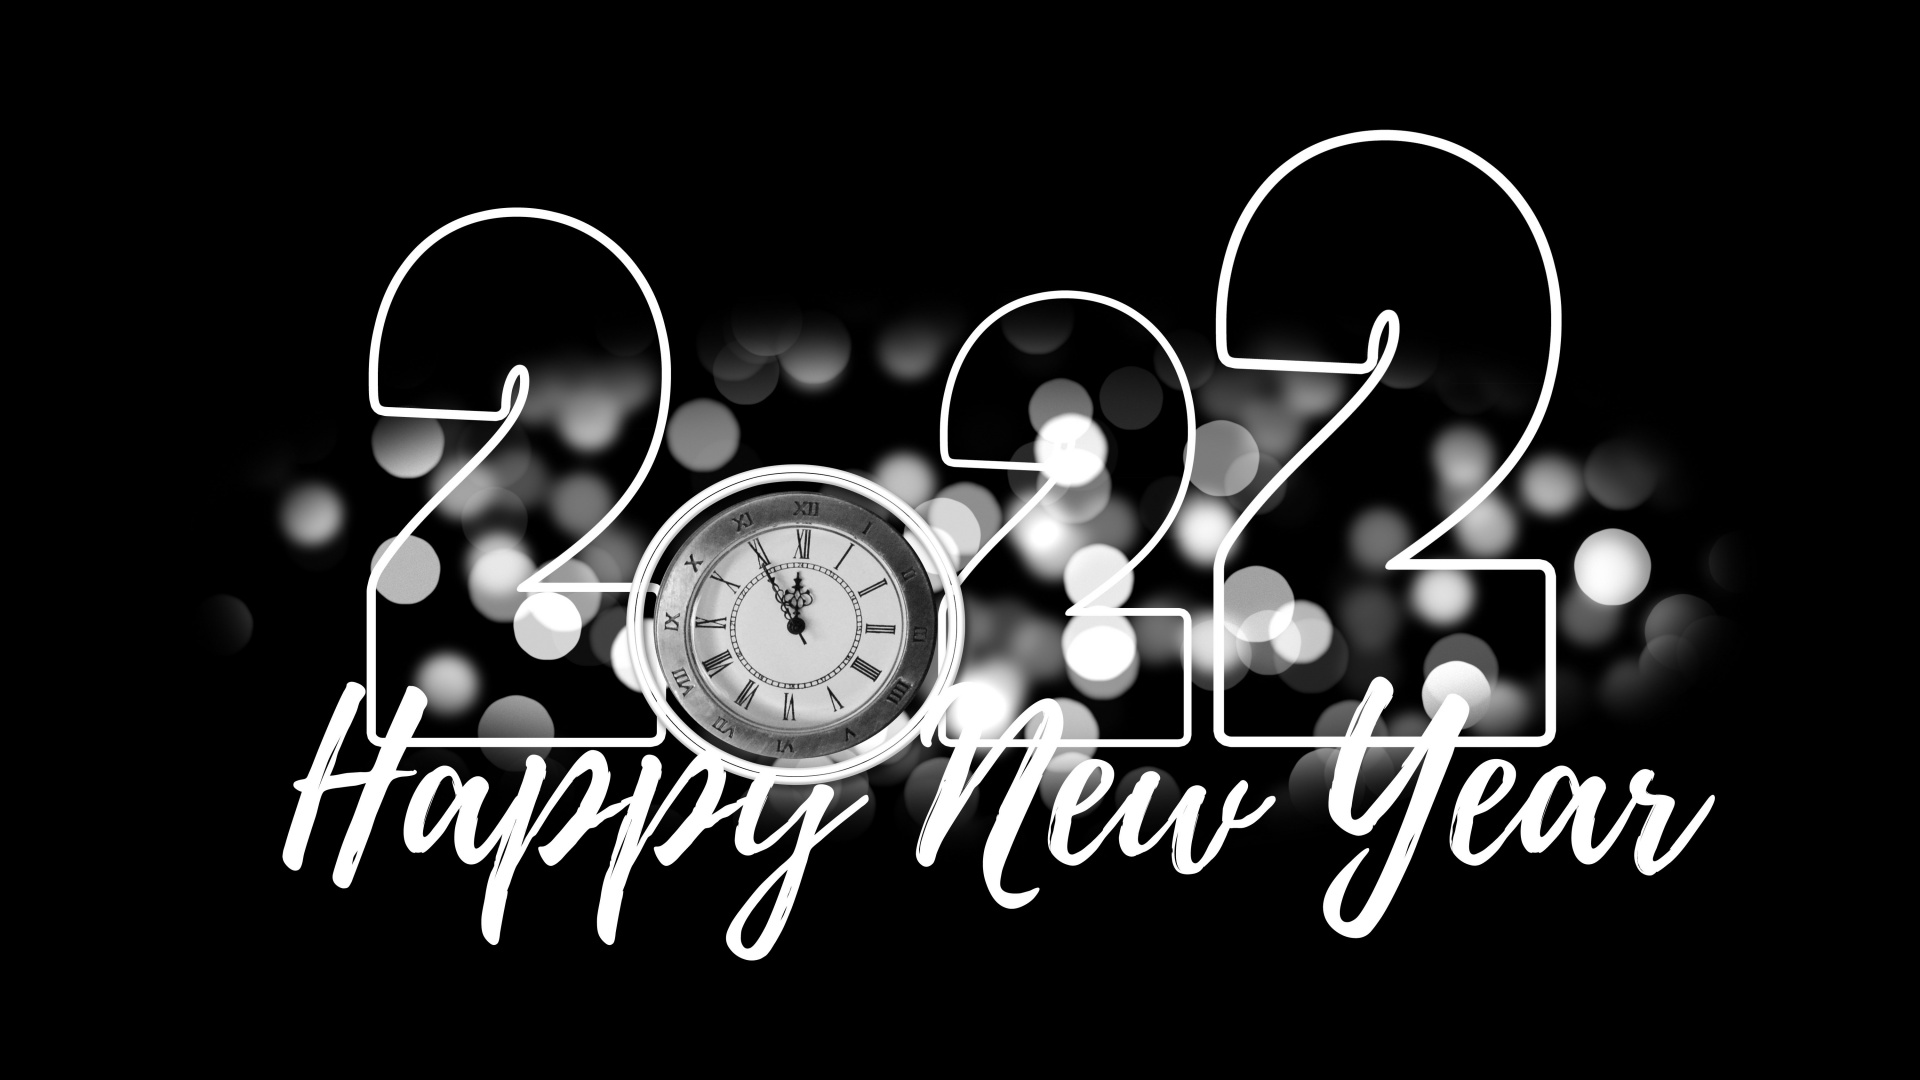 2022 New Year Wallpaper 4K, New Year's Eve, Celebrations/New Year ...